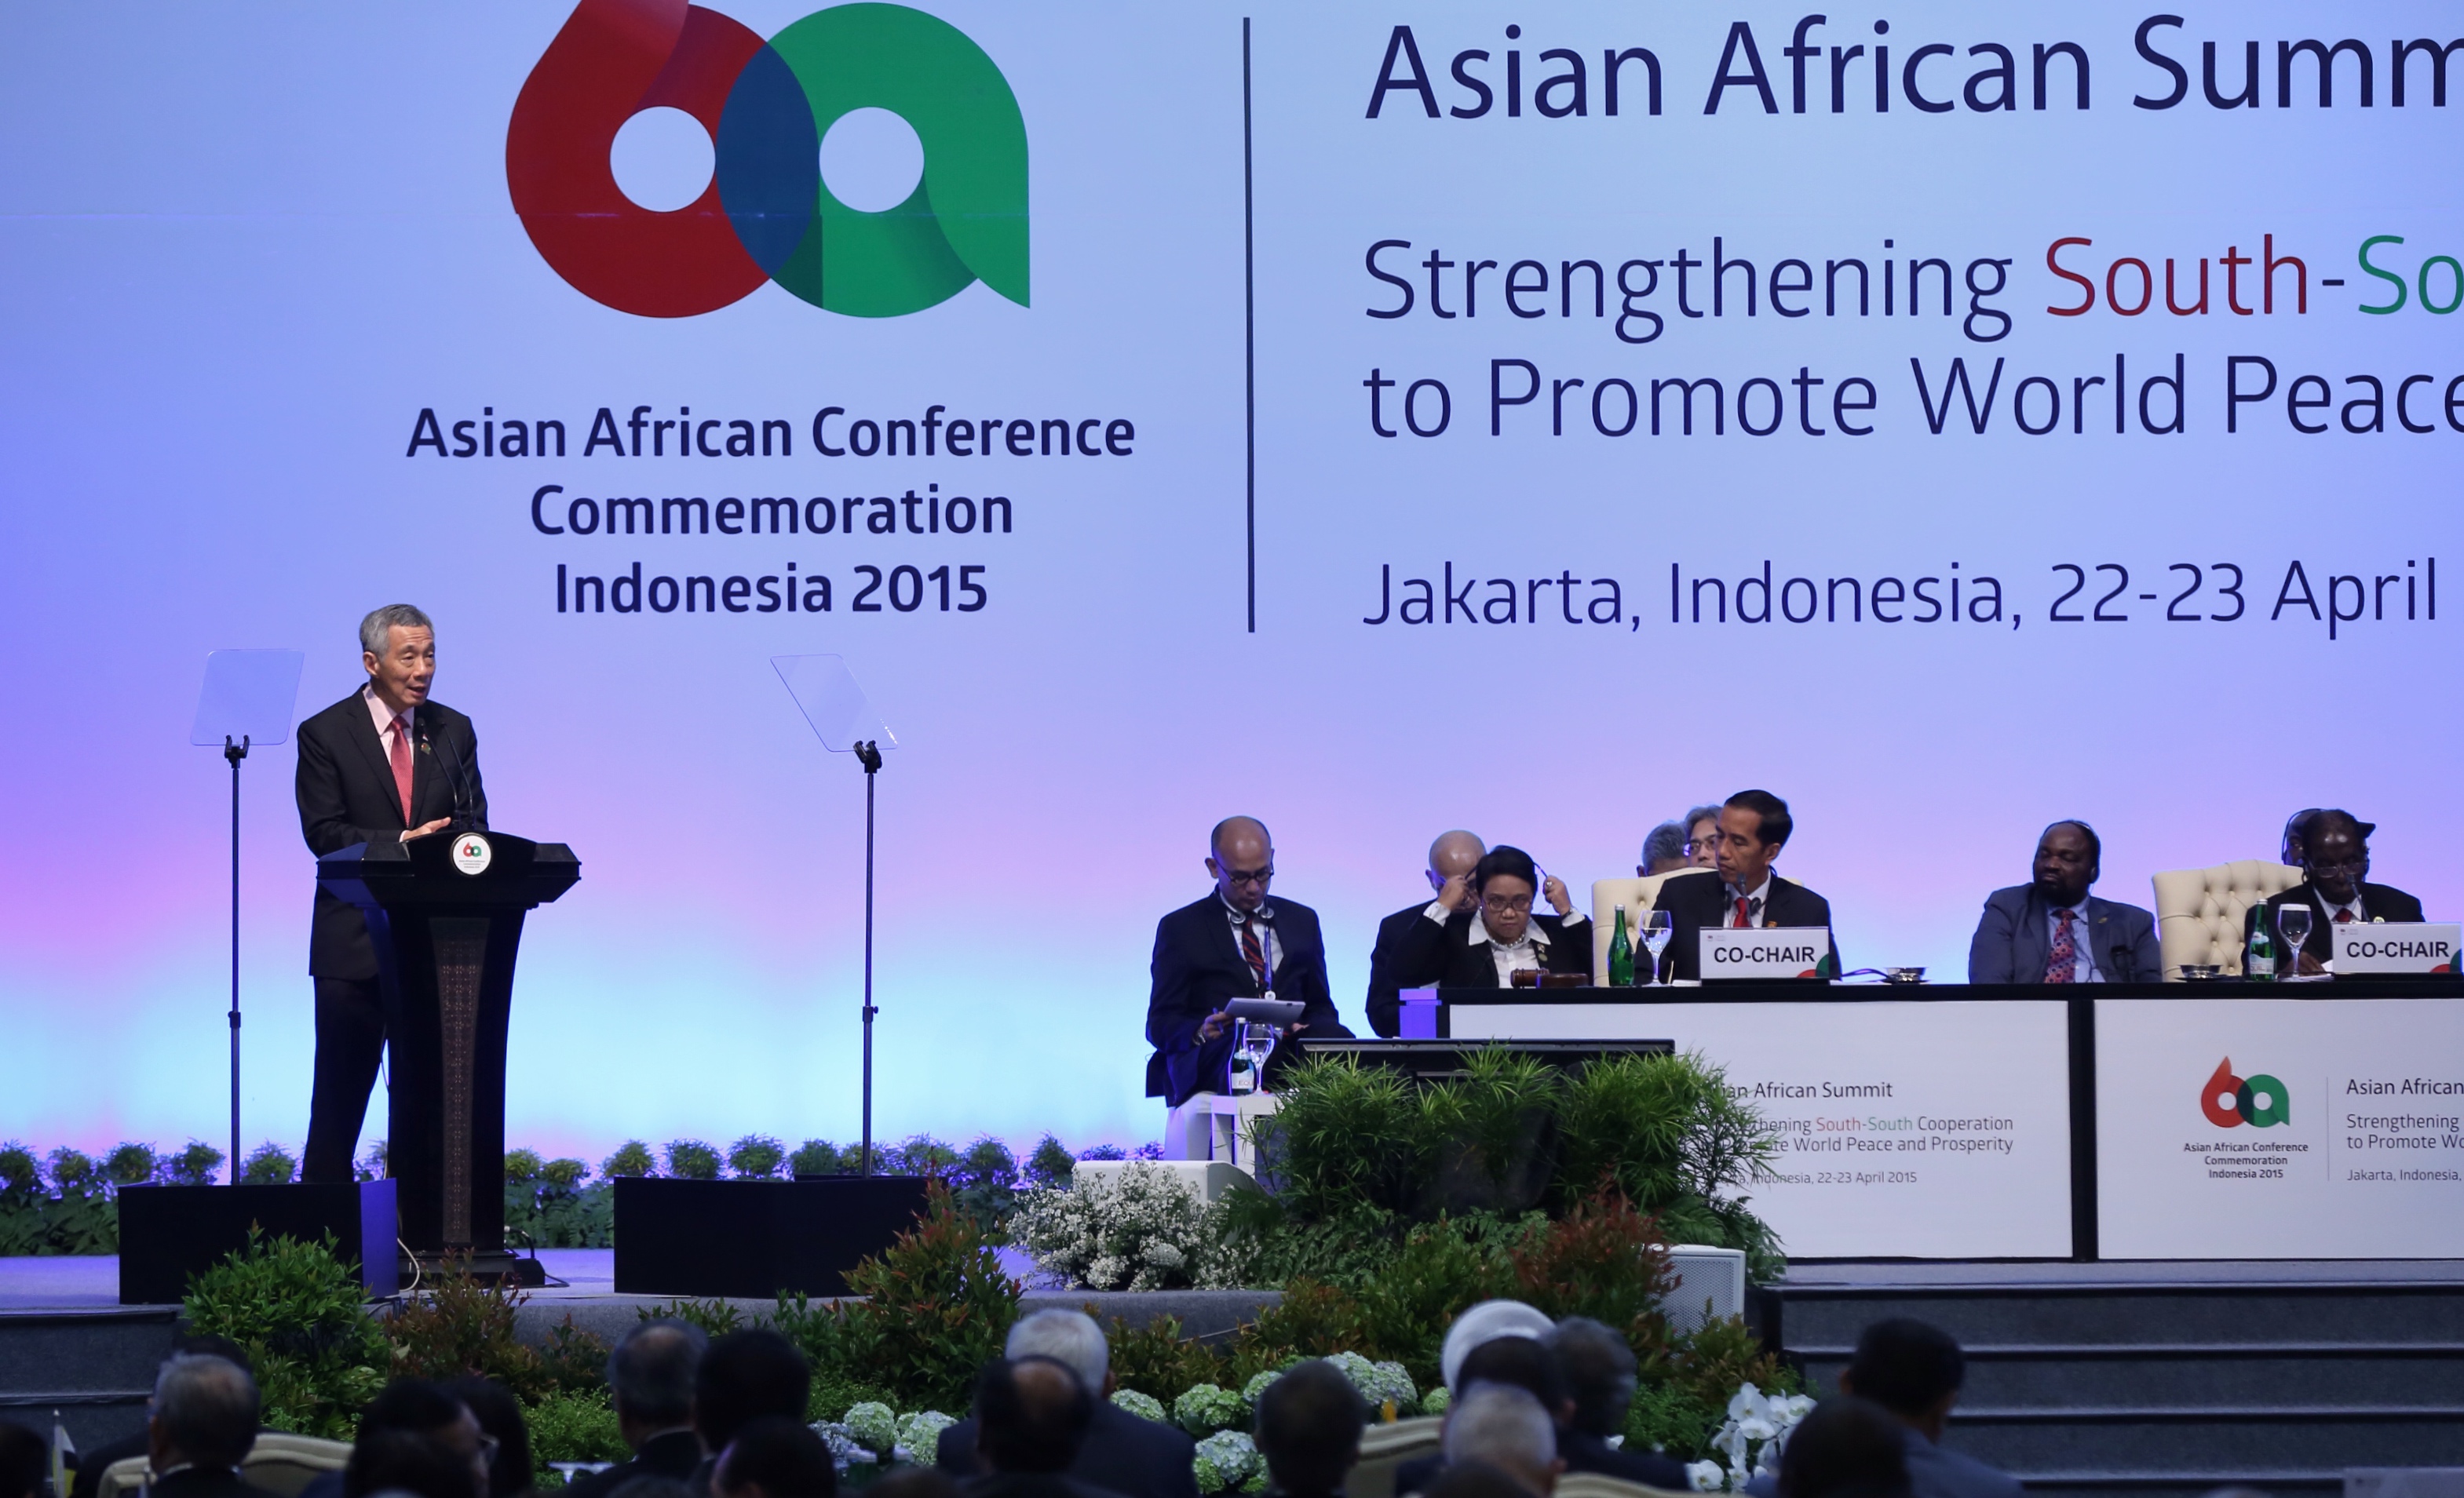 2nd Asian-African Summit - Apr 2015 (MCI Photo by Terence Tan)